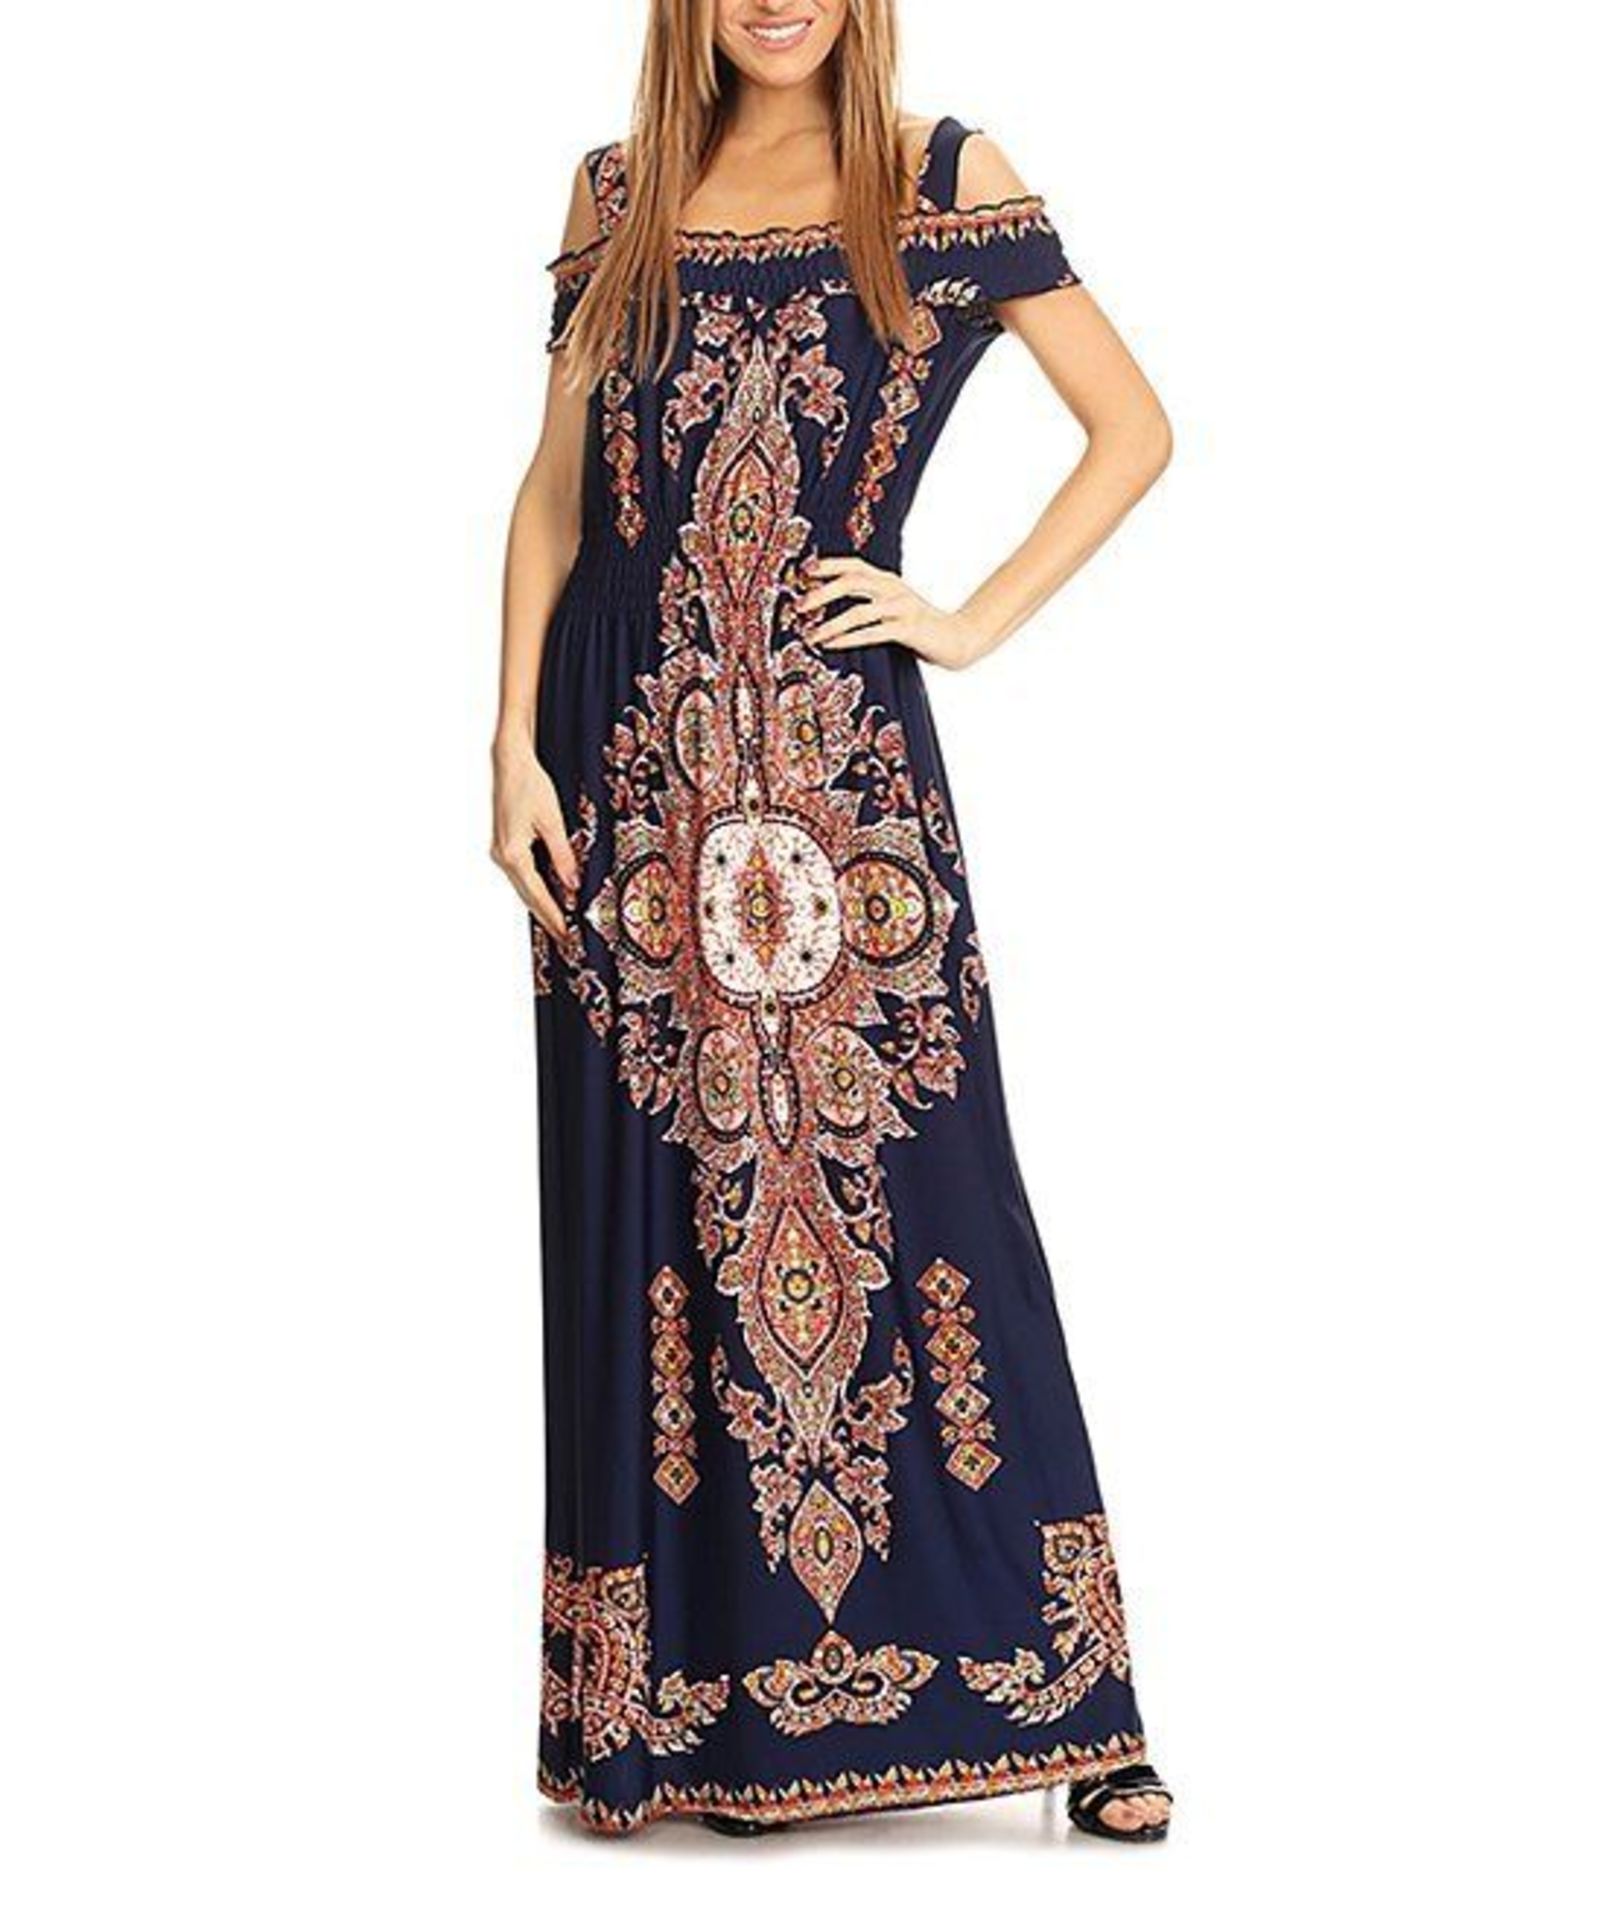 Bellaberry Usa Navy Geometric Off-Shoulder Maxi Dress - Plus(Uk 22/24:Us 18/20) (New With Tags) [